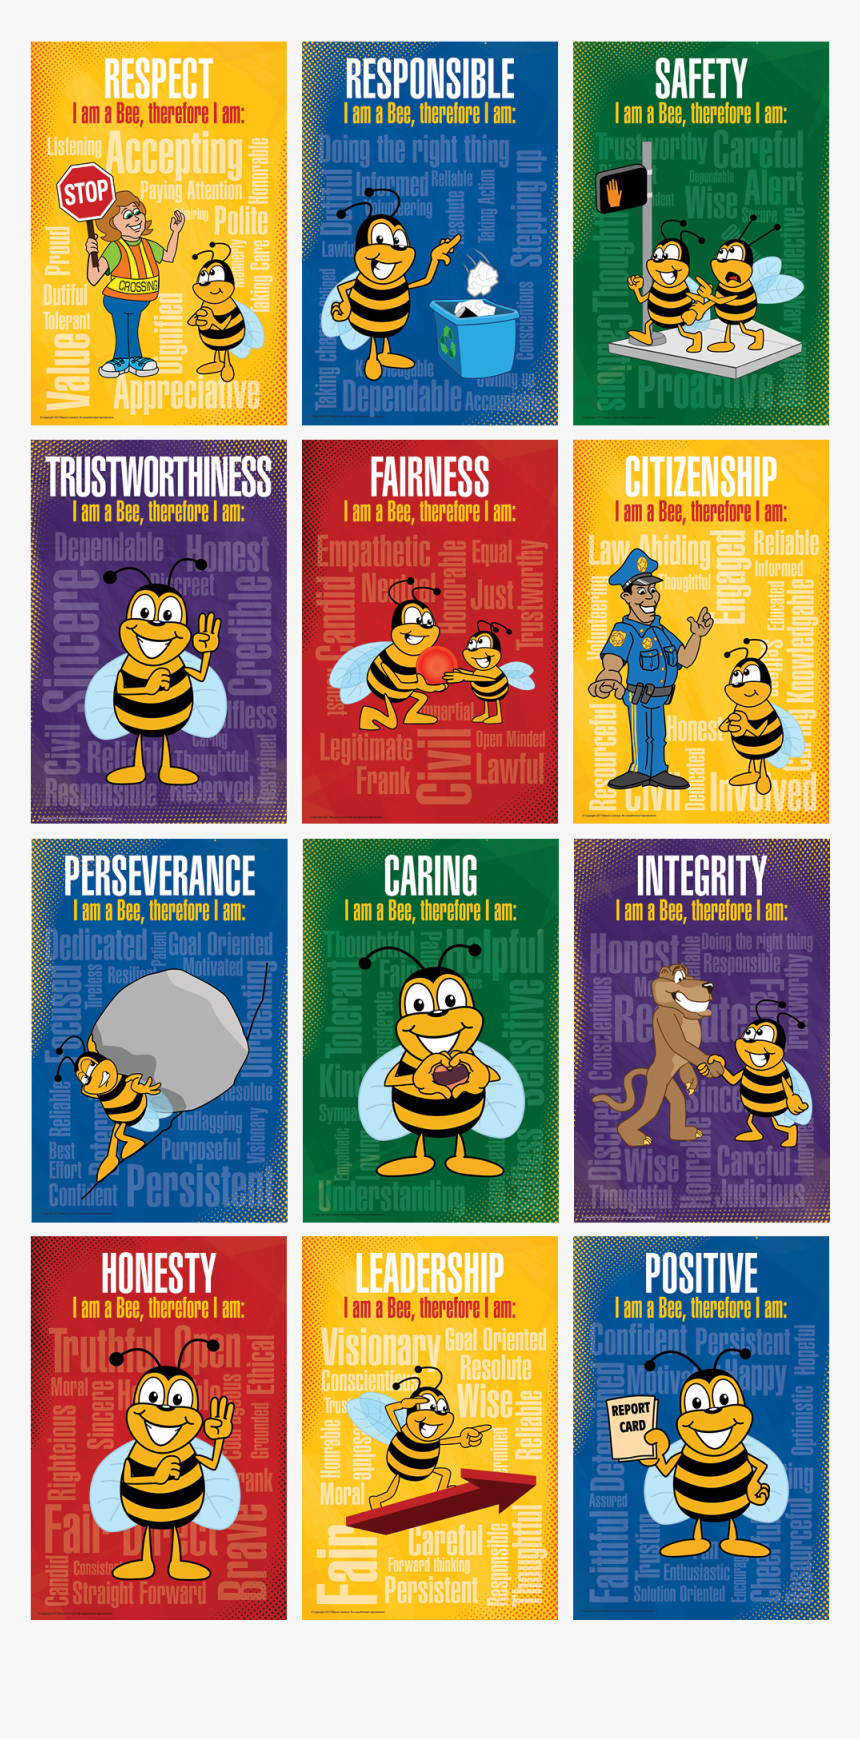 Positive Citizenship Mascot, HD Png Download, Free Download